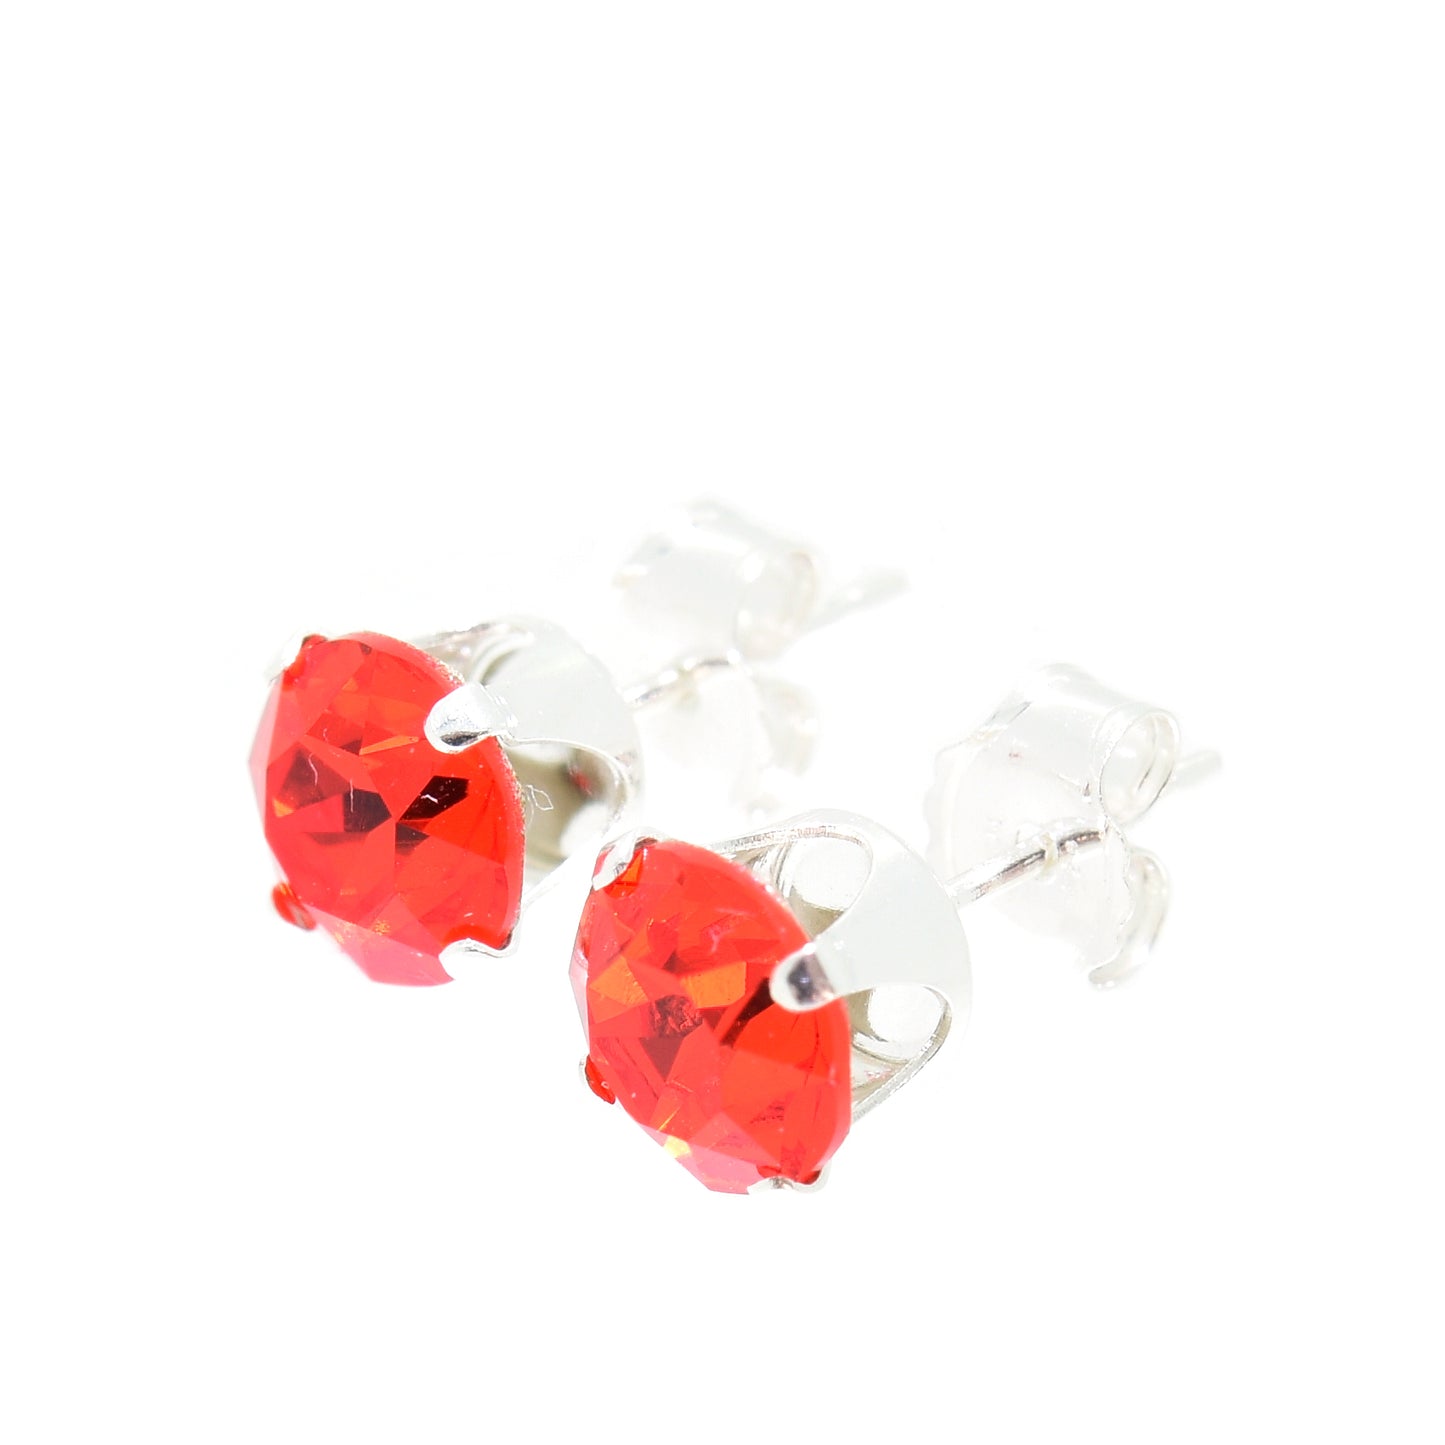 pewterhooter® Women's Classic Collection 925 Sterling silver earrings with sparkling Hyacinth Orange crystals, packaged in a gift box for any occasion.